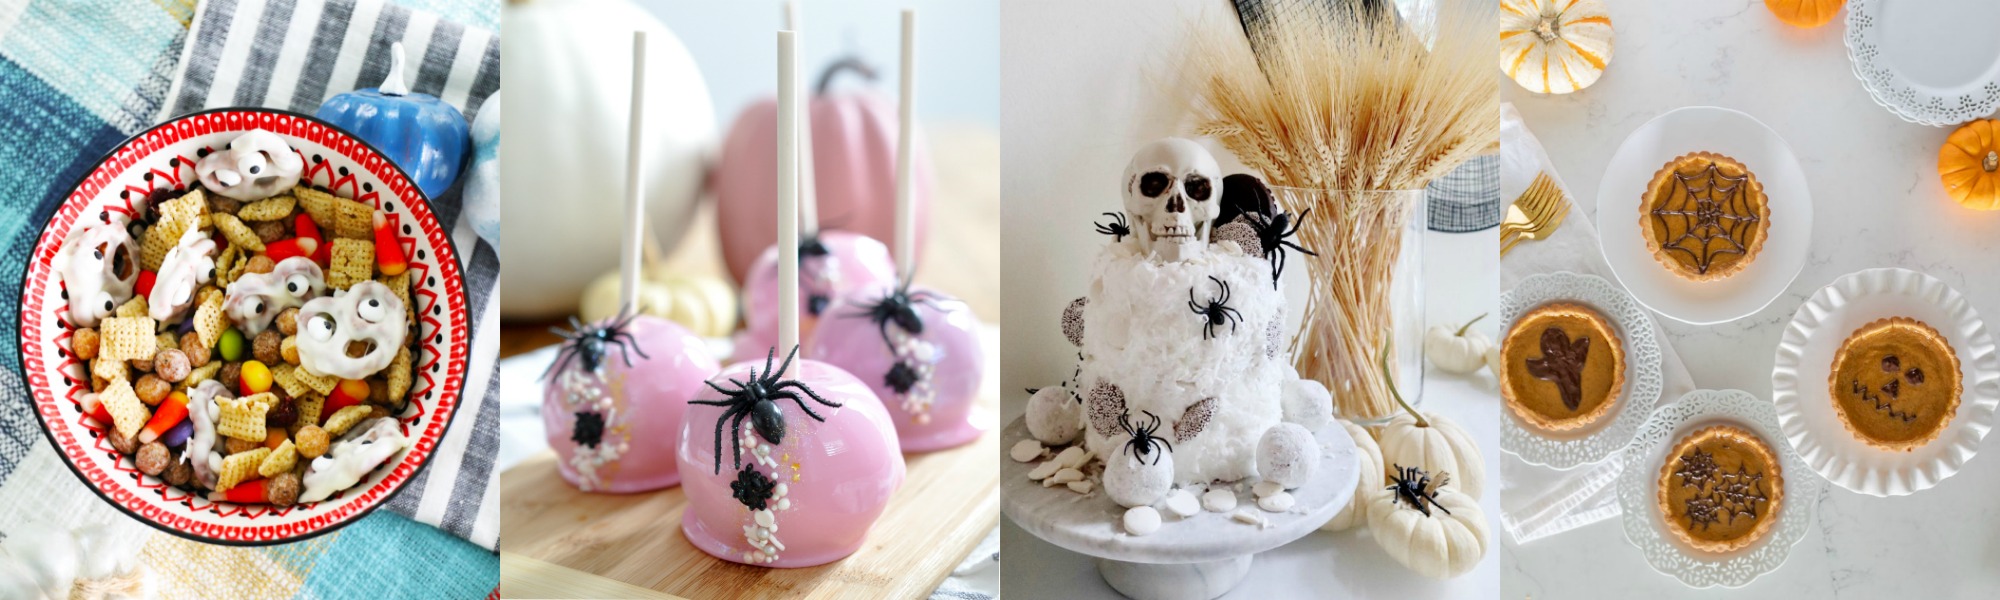 Baked Goodies for Halloween.